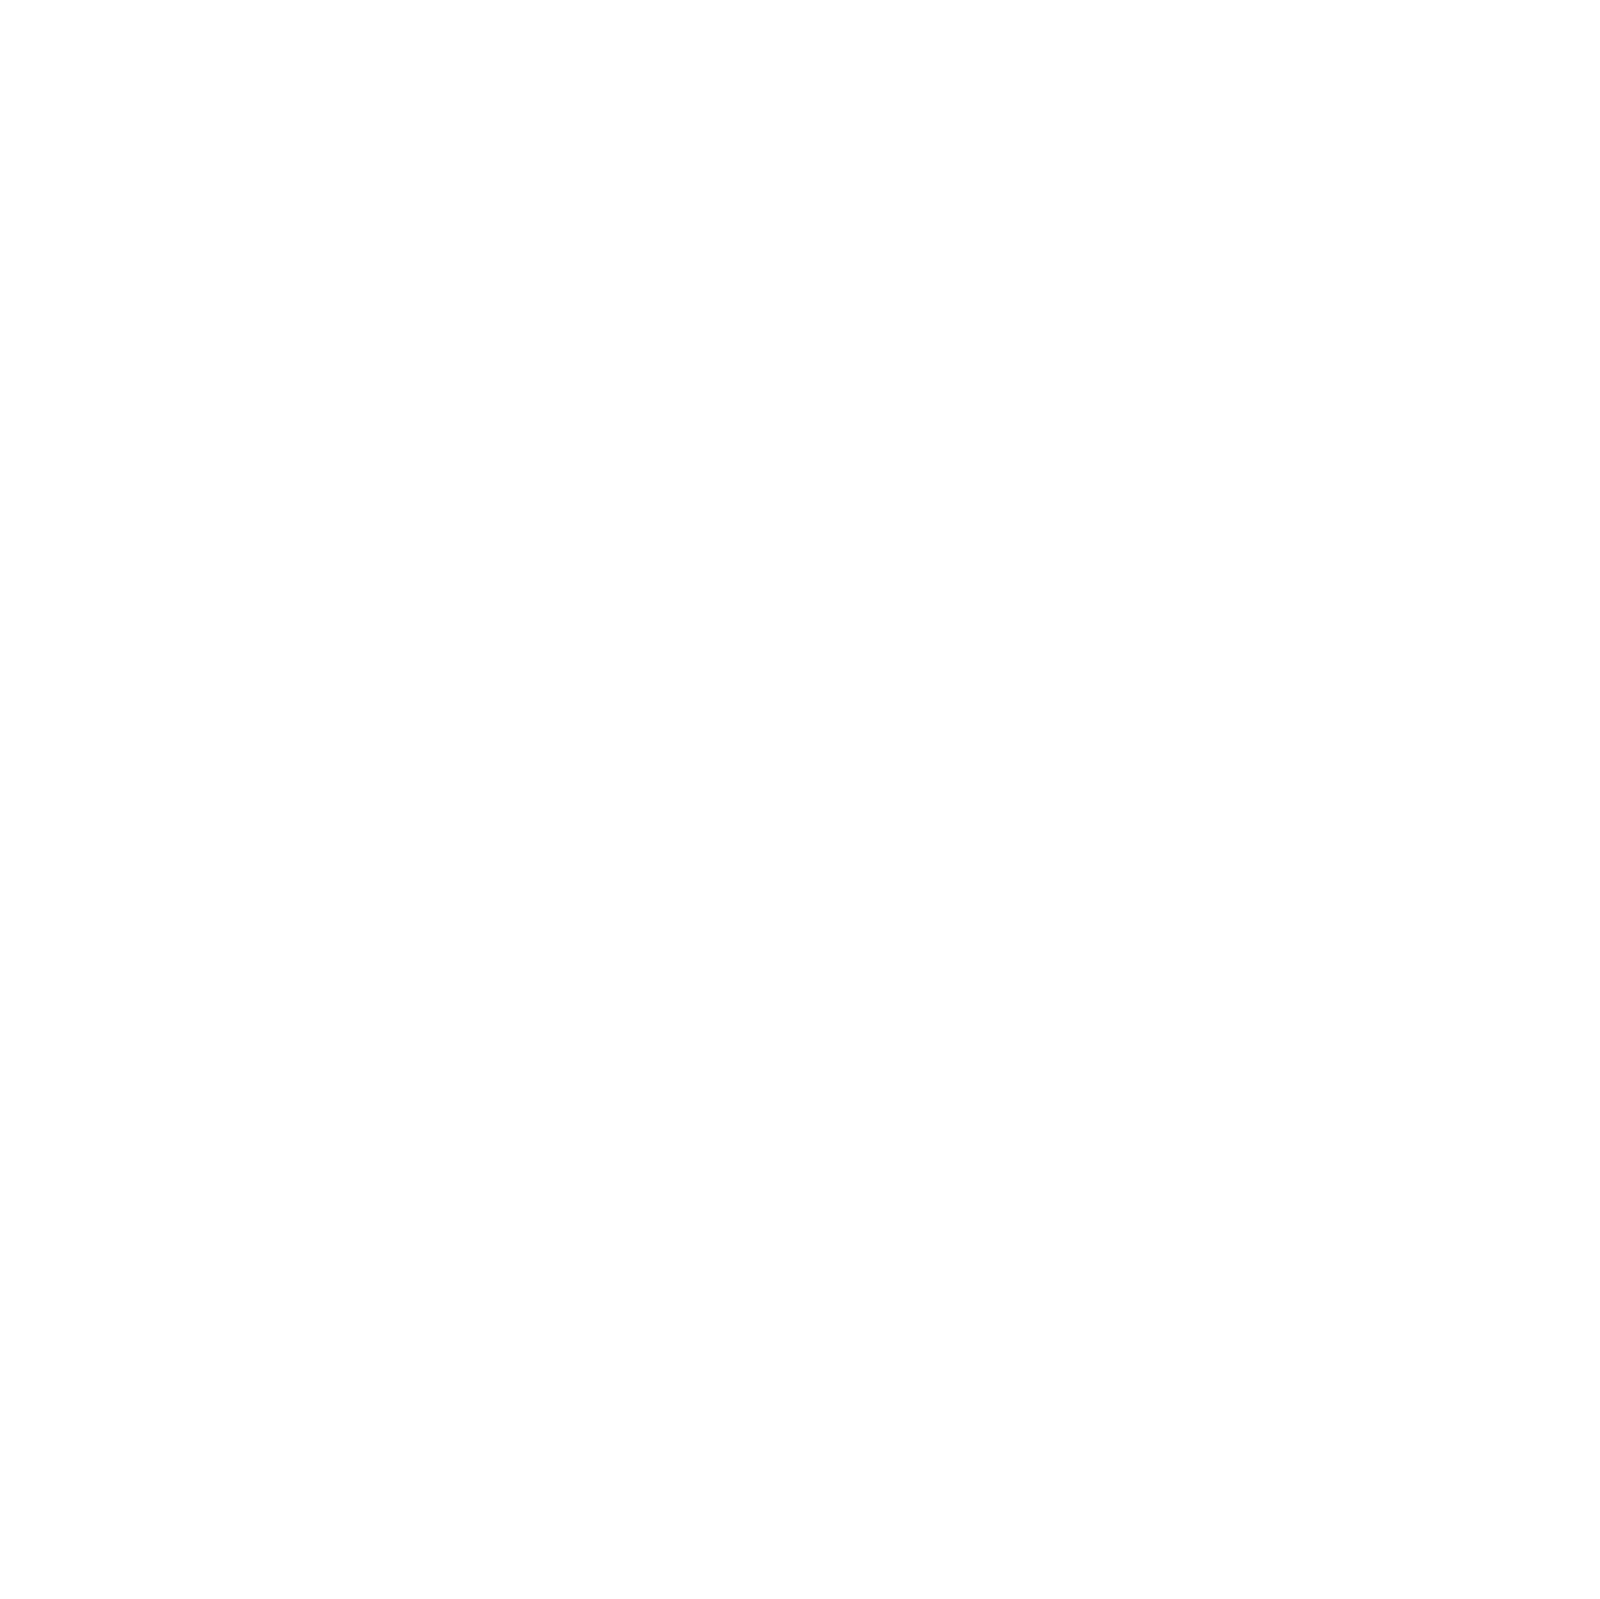 Clinically Lab Tested